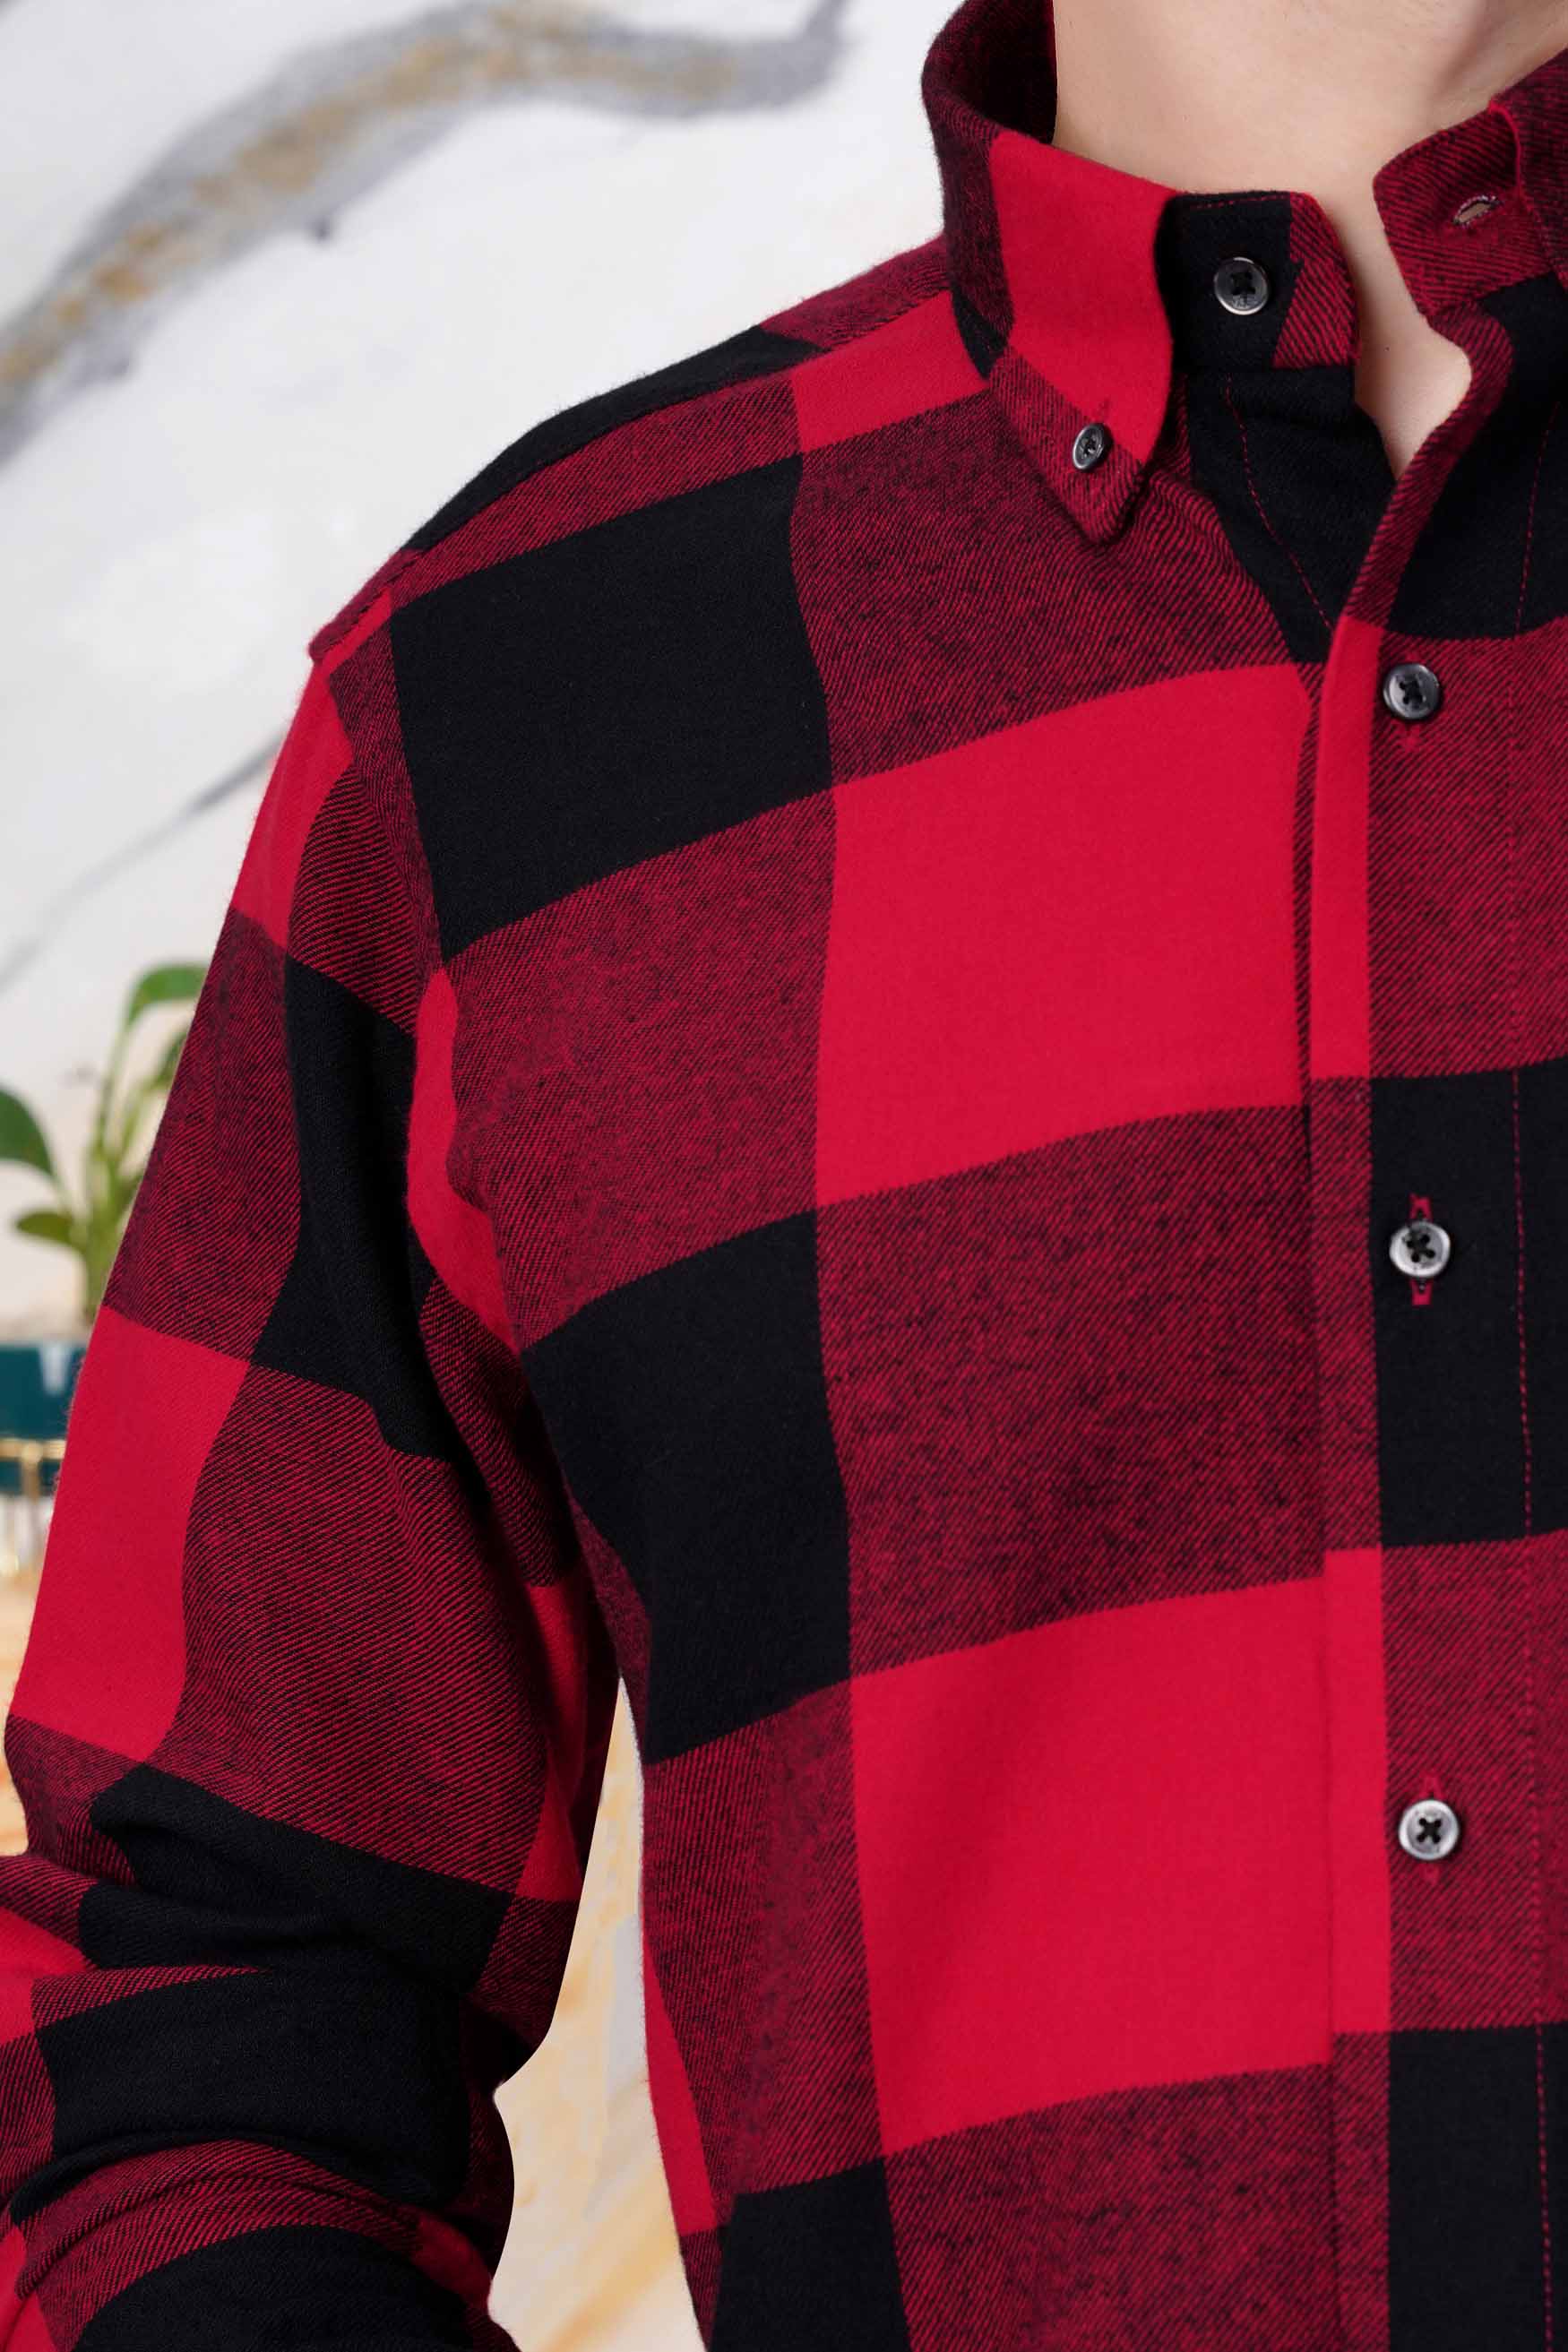 Cornell Red and Cinder Black Checked Flannel Button Down Shirt